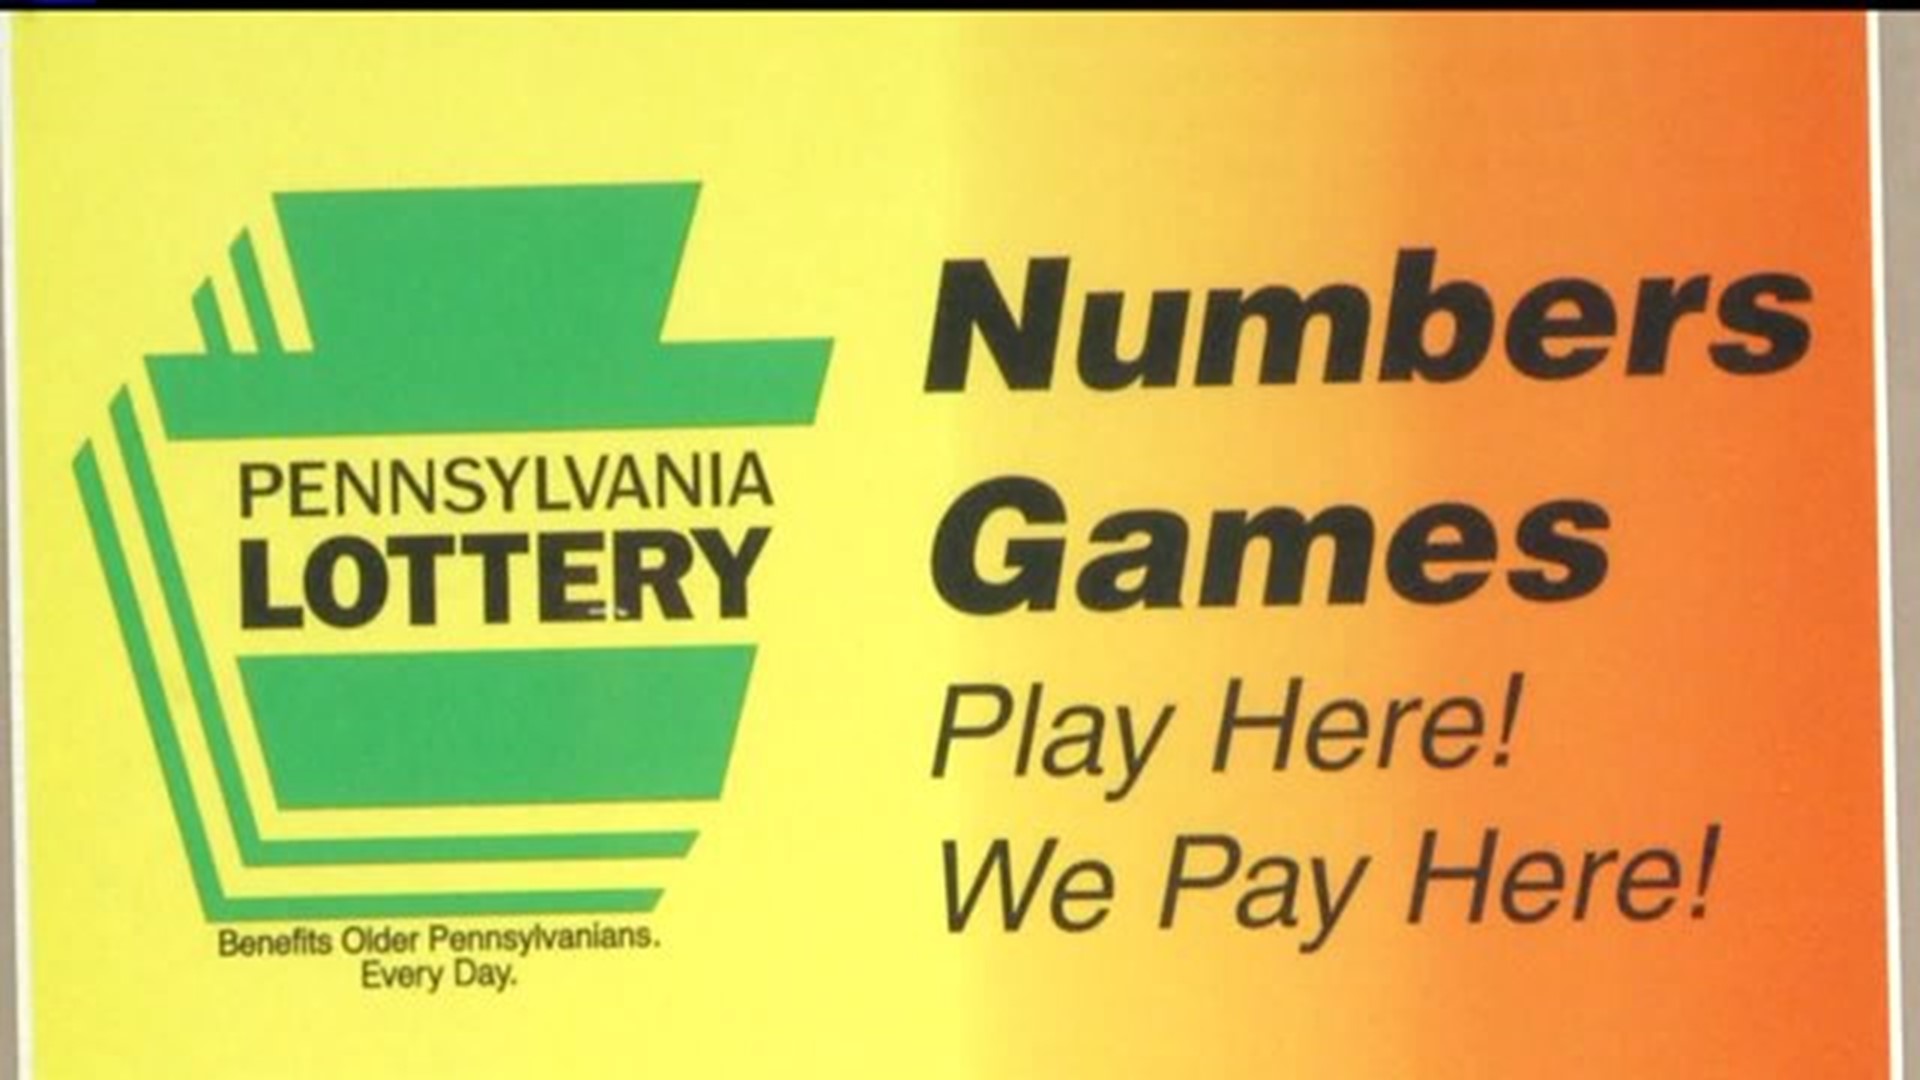 Winning lottery ticket sold in York County